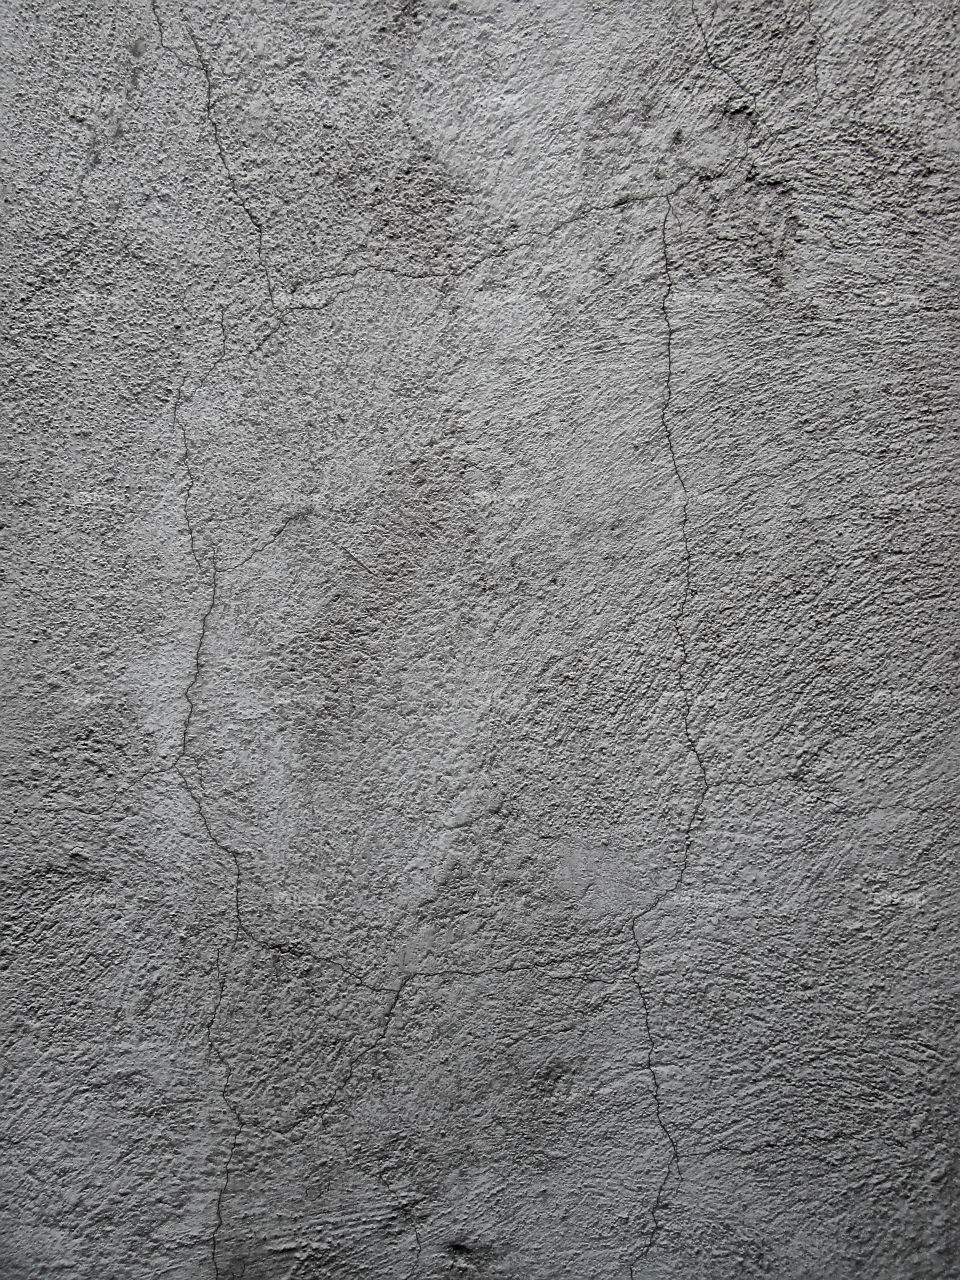 Close-up of Wall Texture and Details